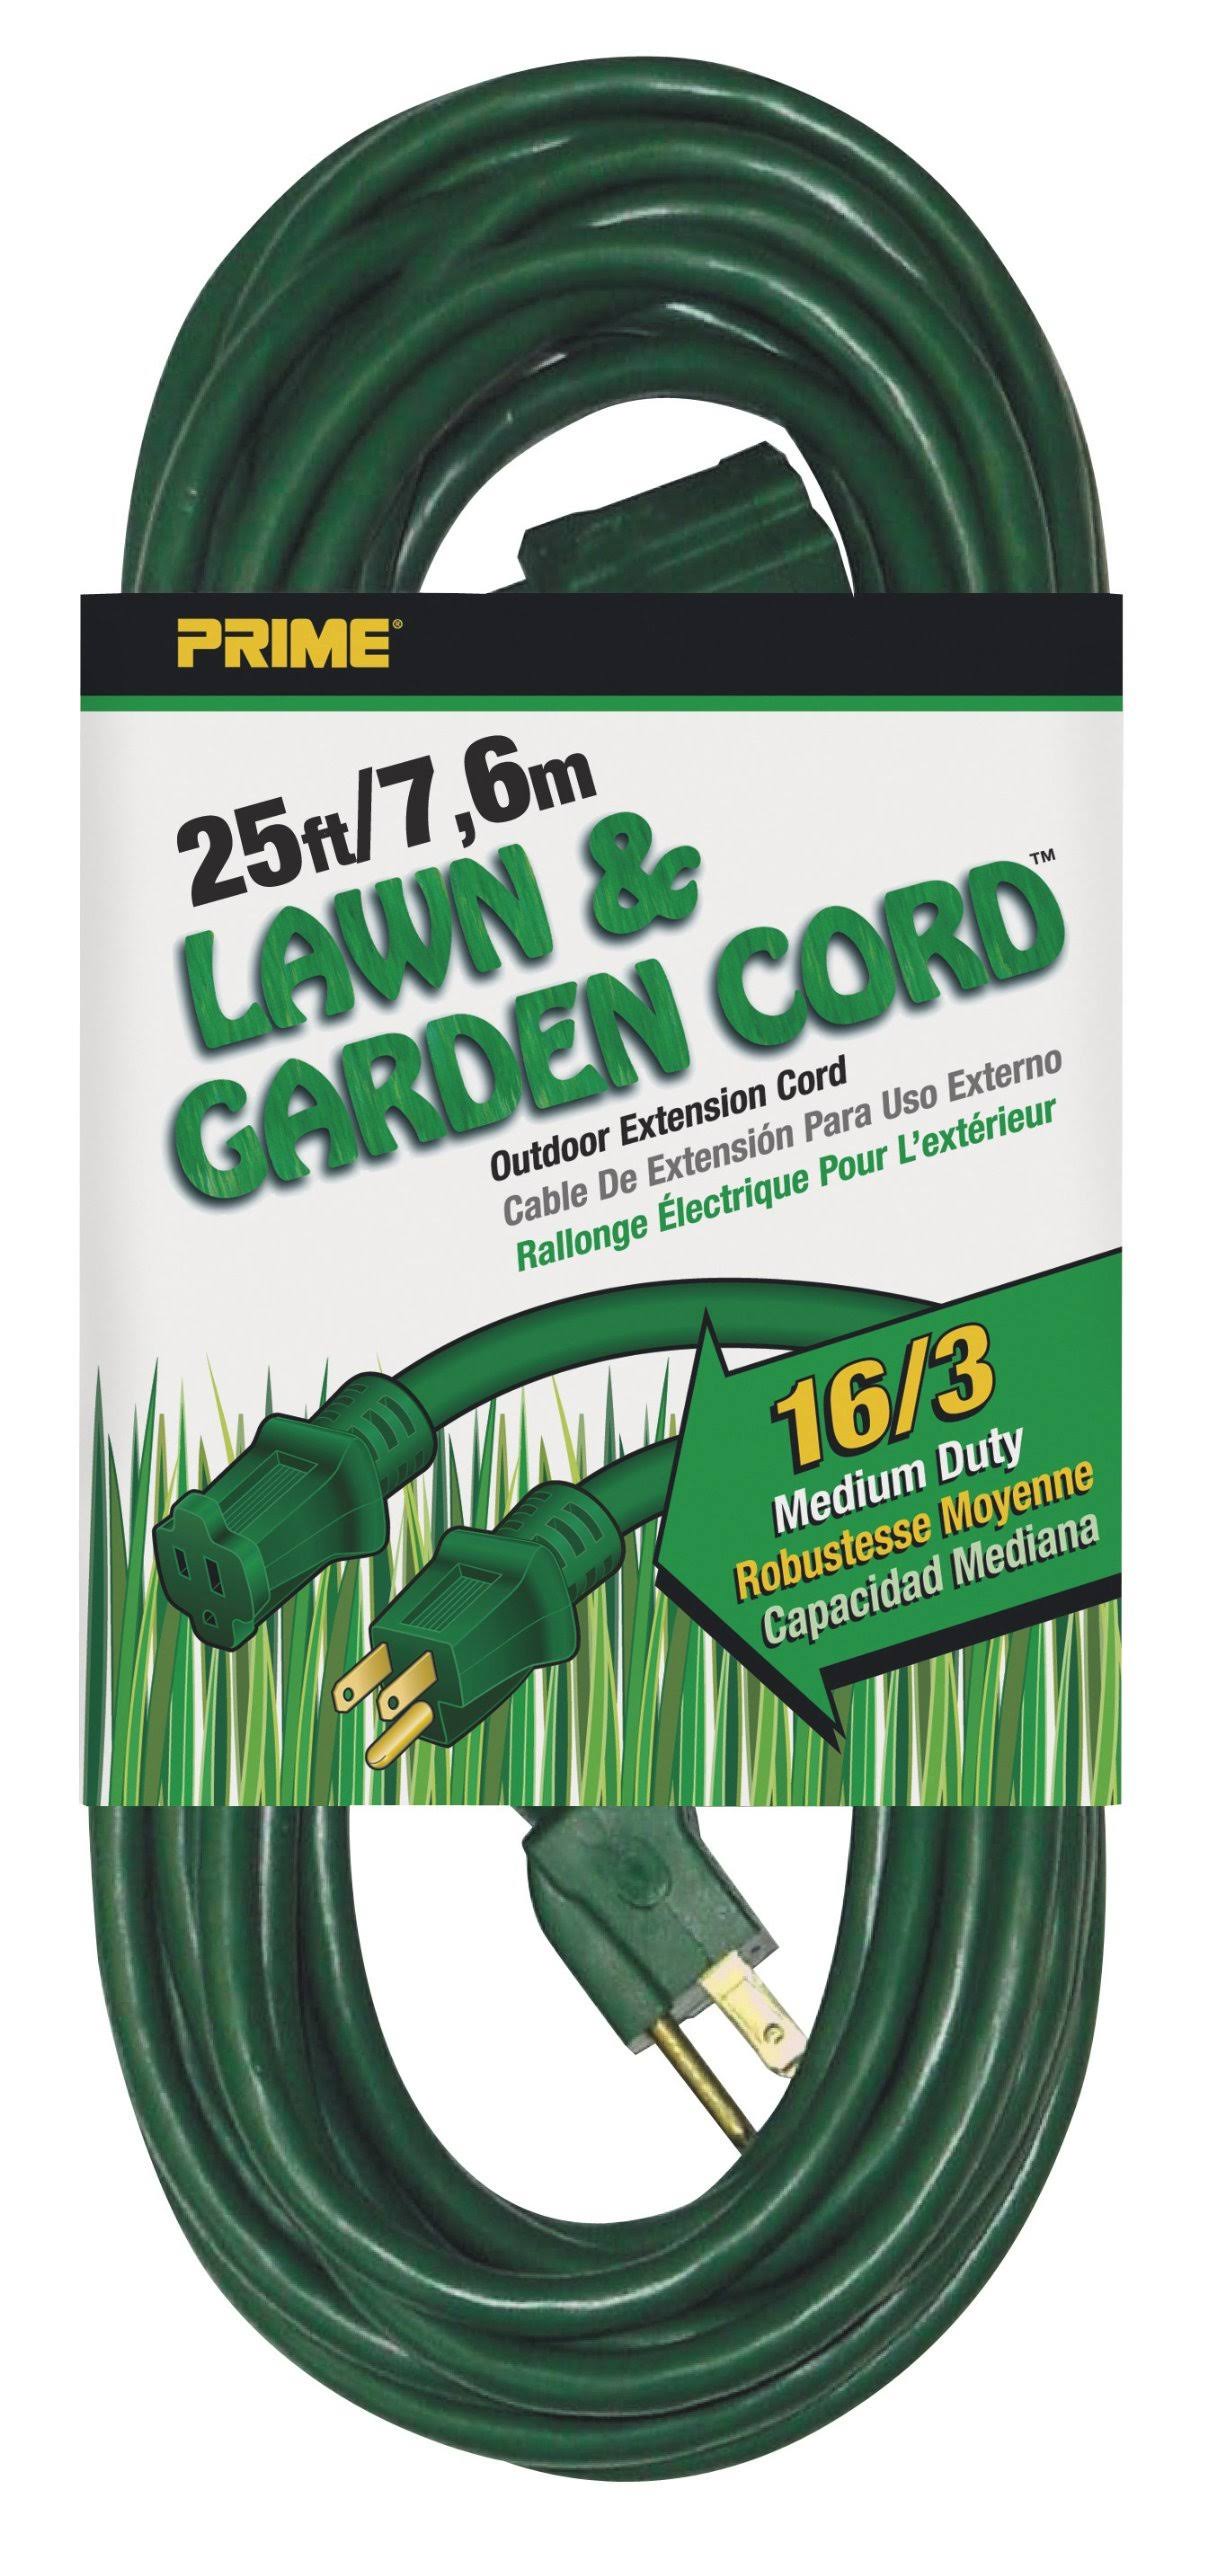 Prime Wire Lawn and Garden Outdoor Extension Cord - Green, 25'